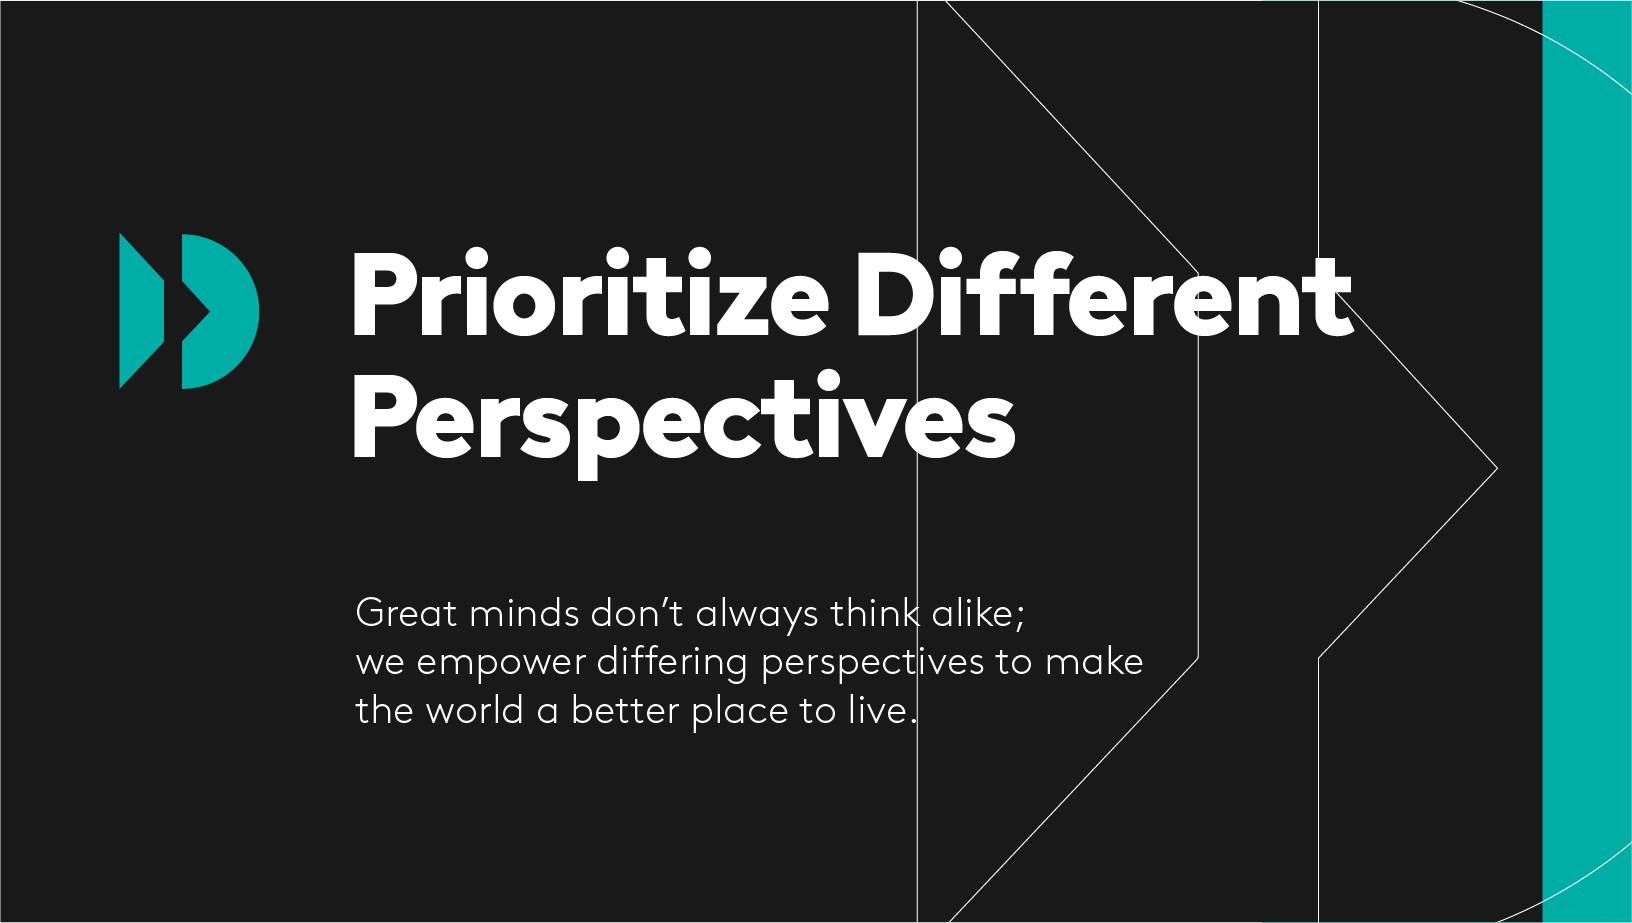 Prioritize Different Perspectives